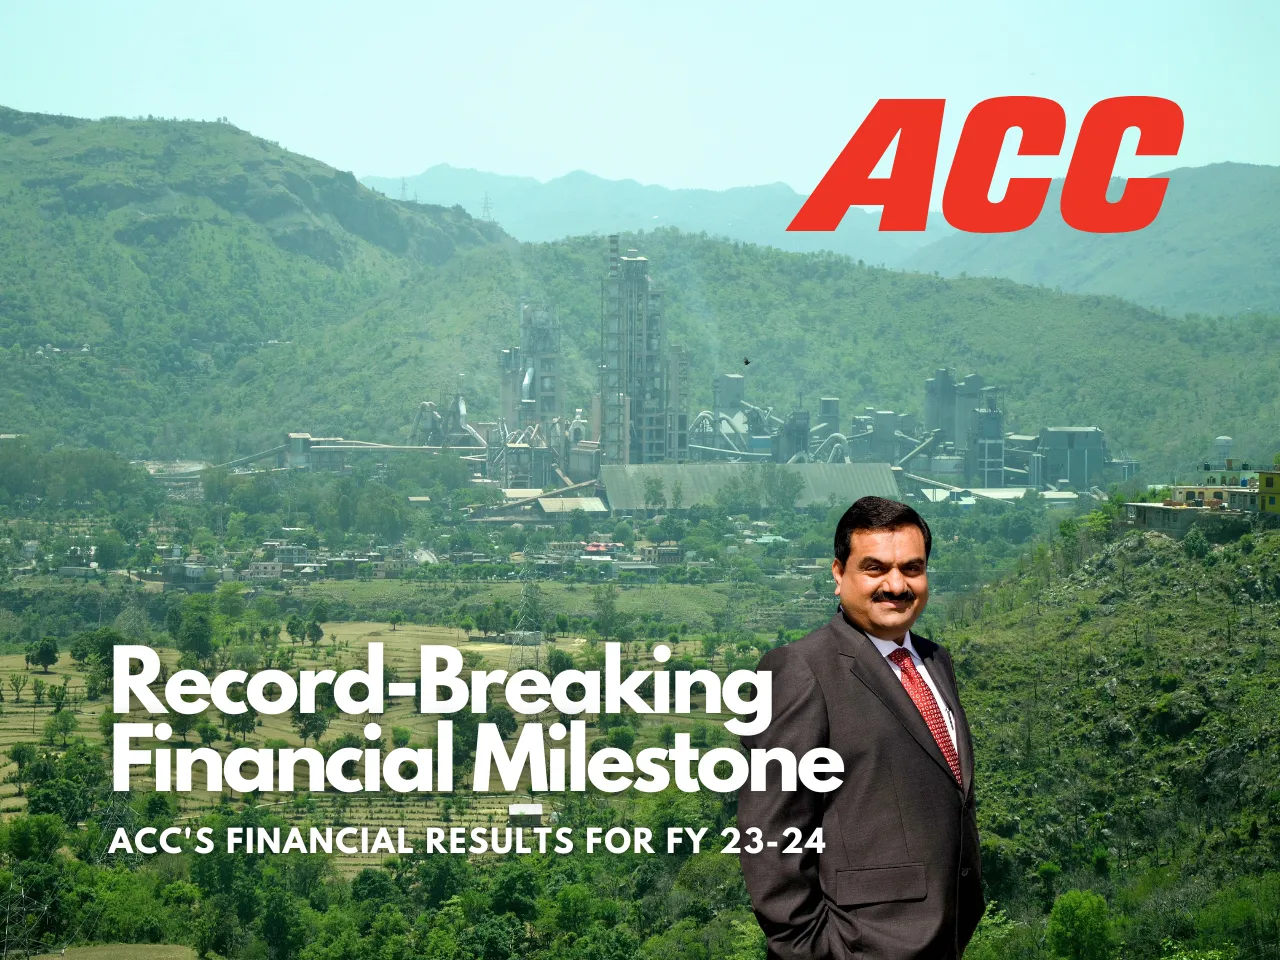 ACC's Financial Results For FY 23-24; Record-Breaking Performance?